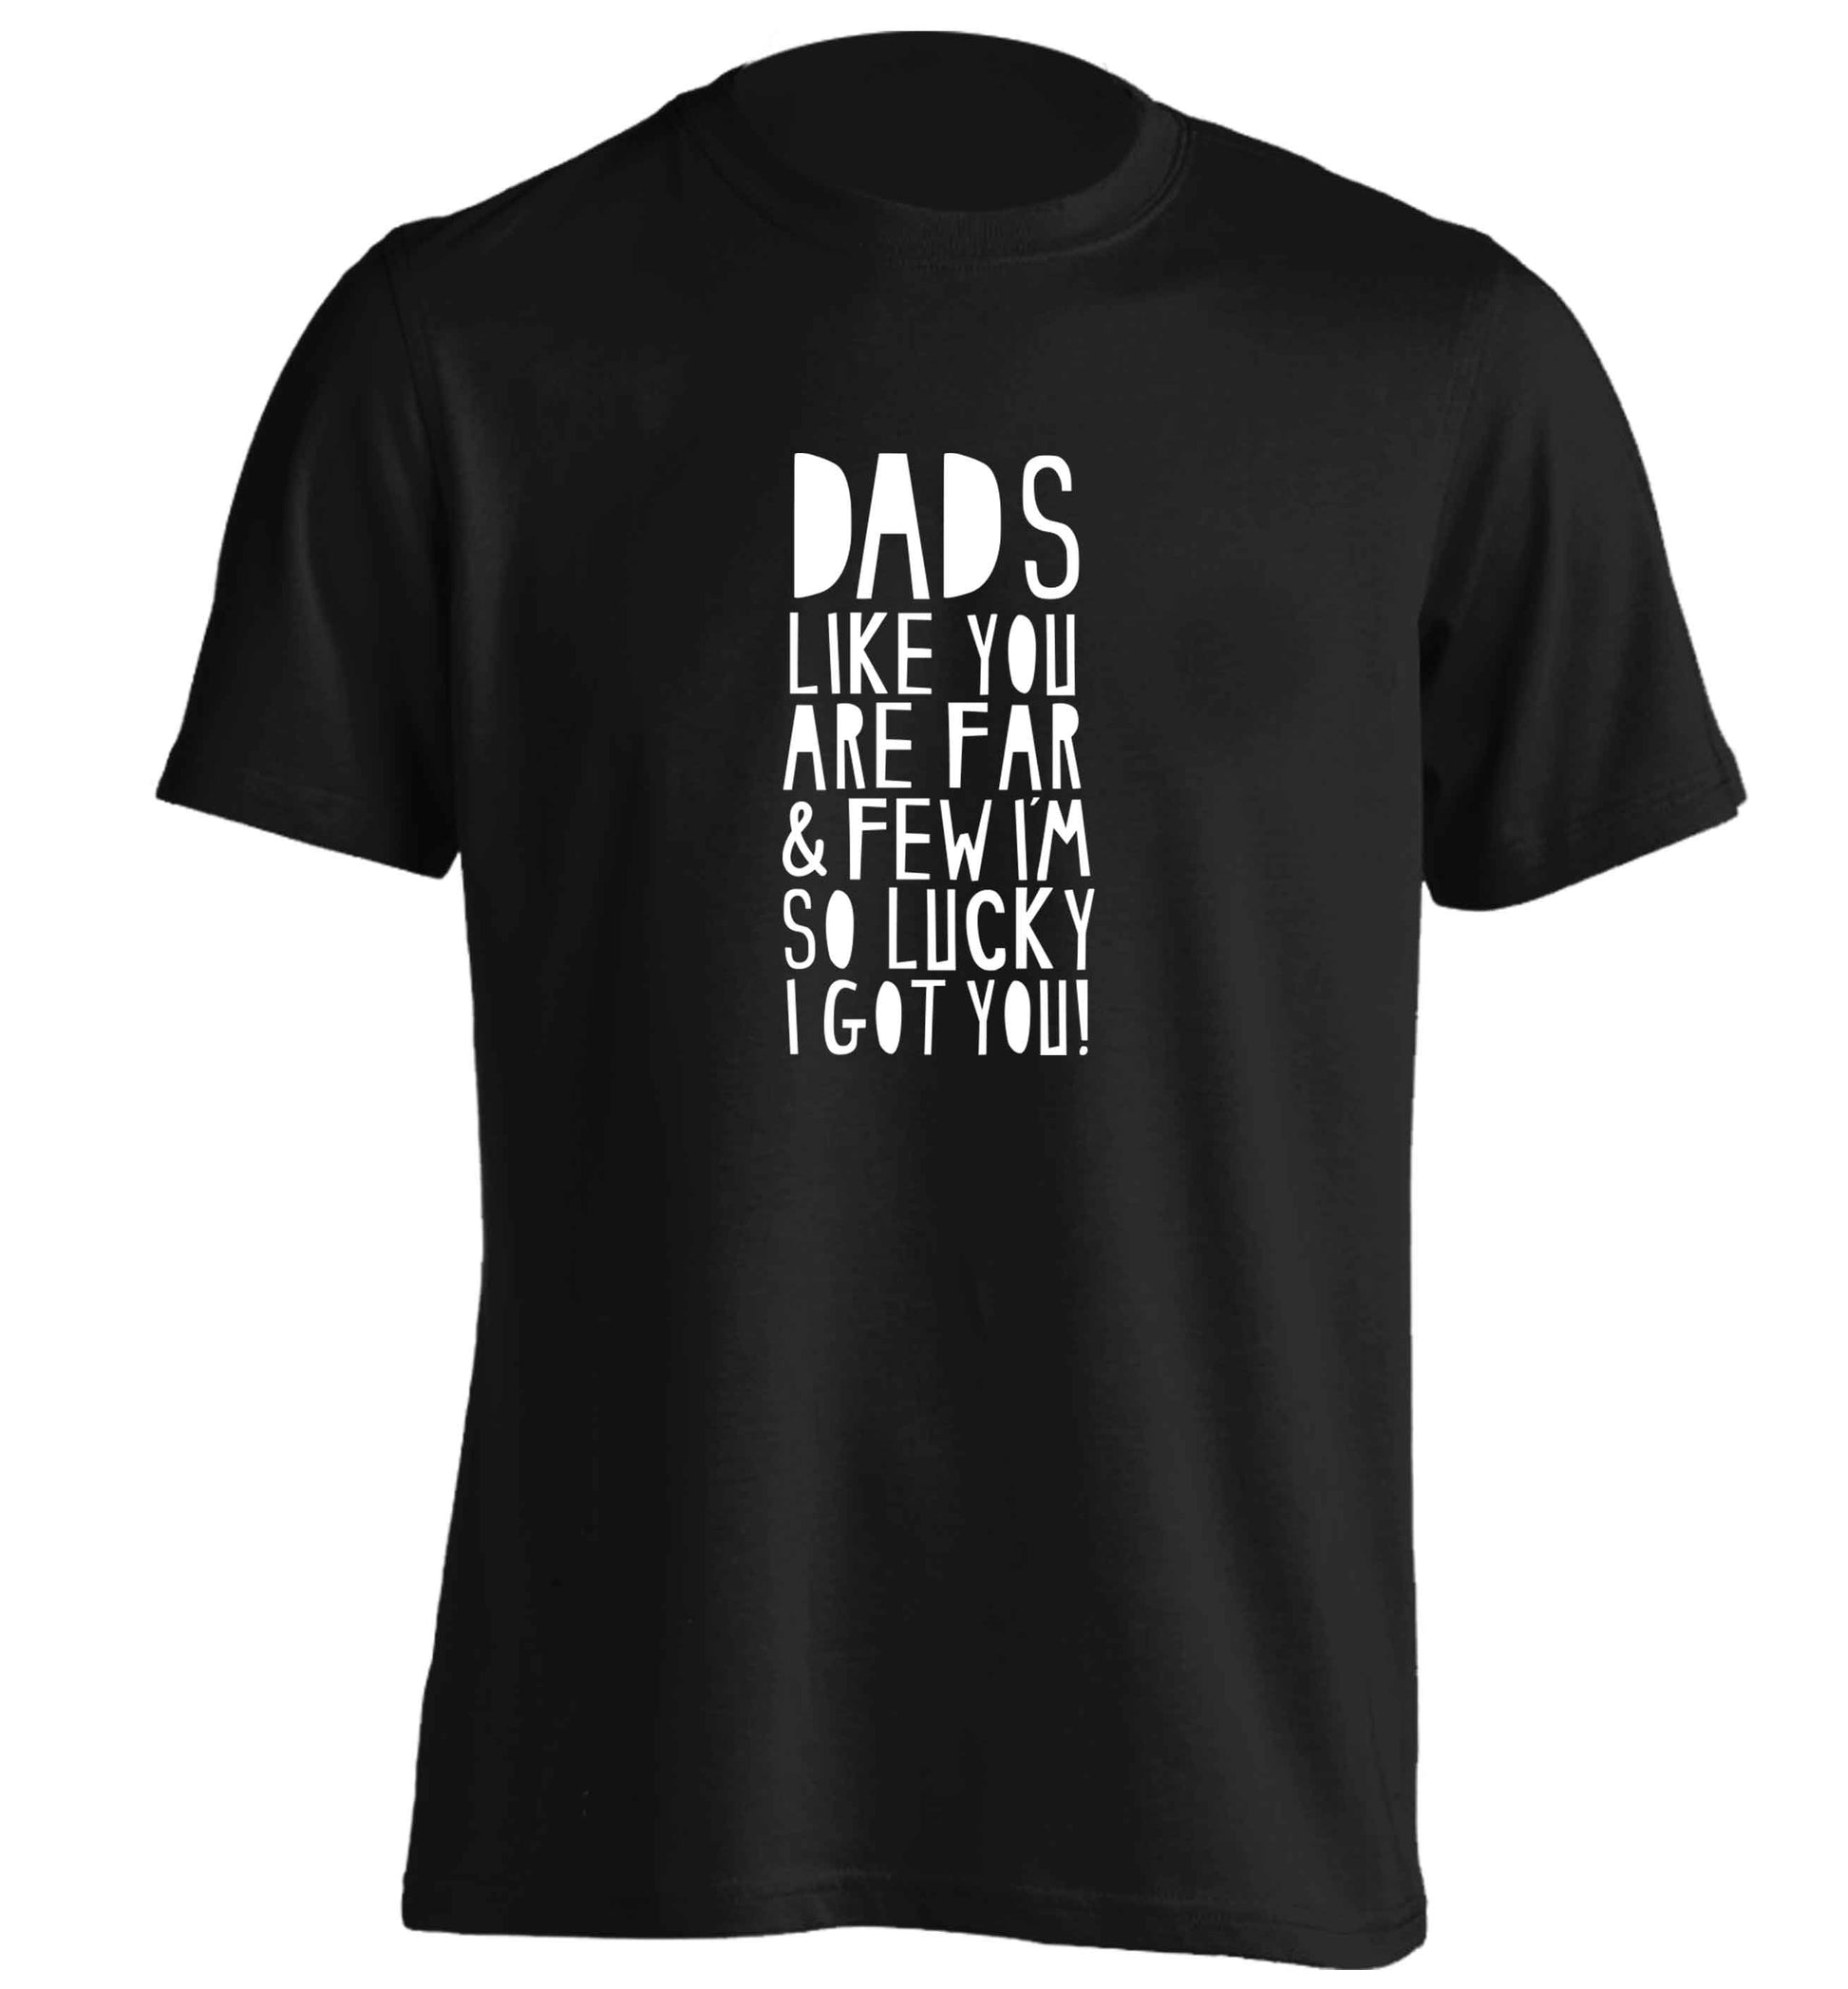 Dads like you are far and few I'm so luck I got you! adults unisex black Tshirt 2XL